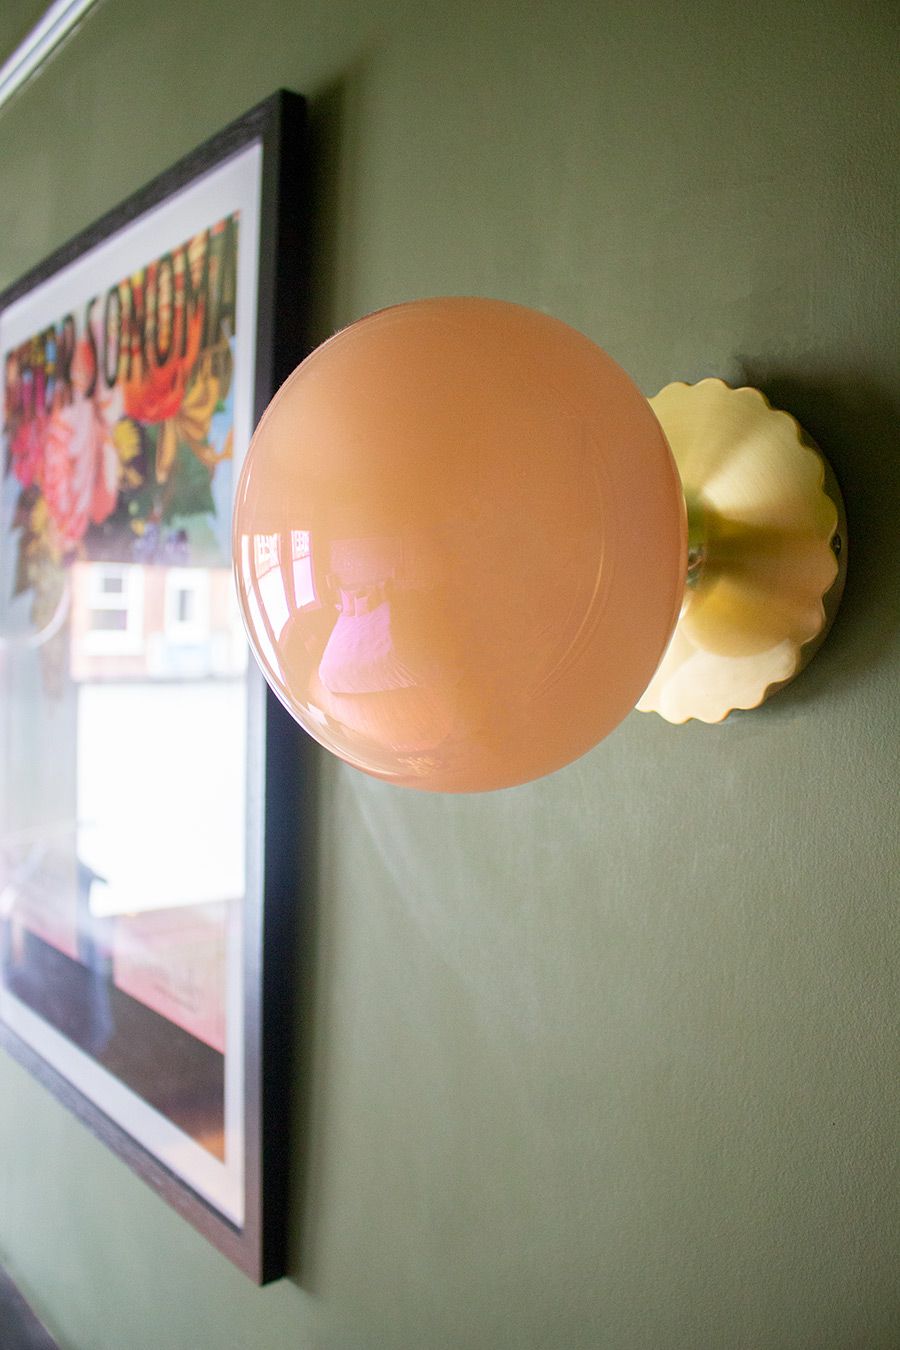 A close up of one of the new peach wall lights.